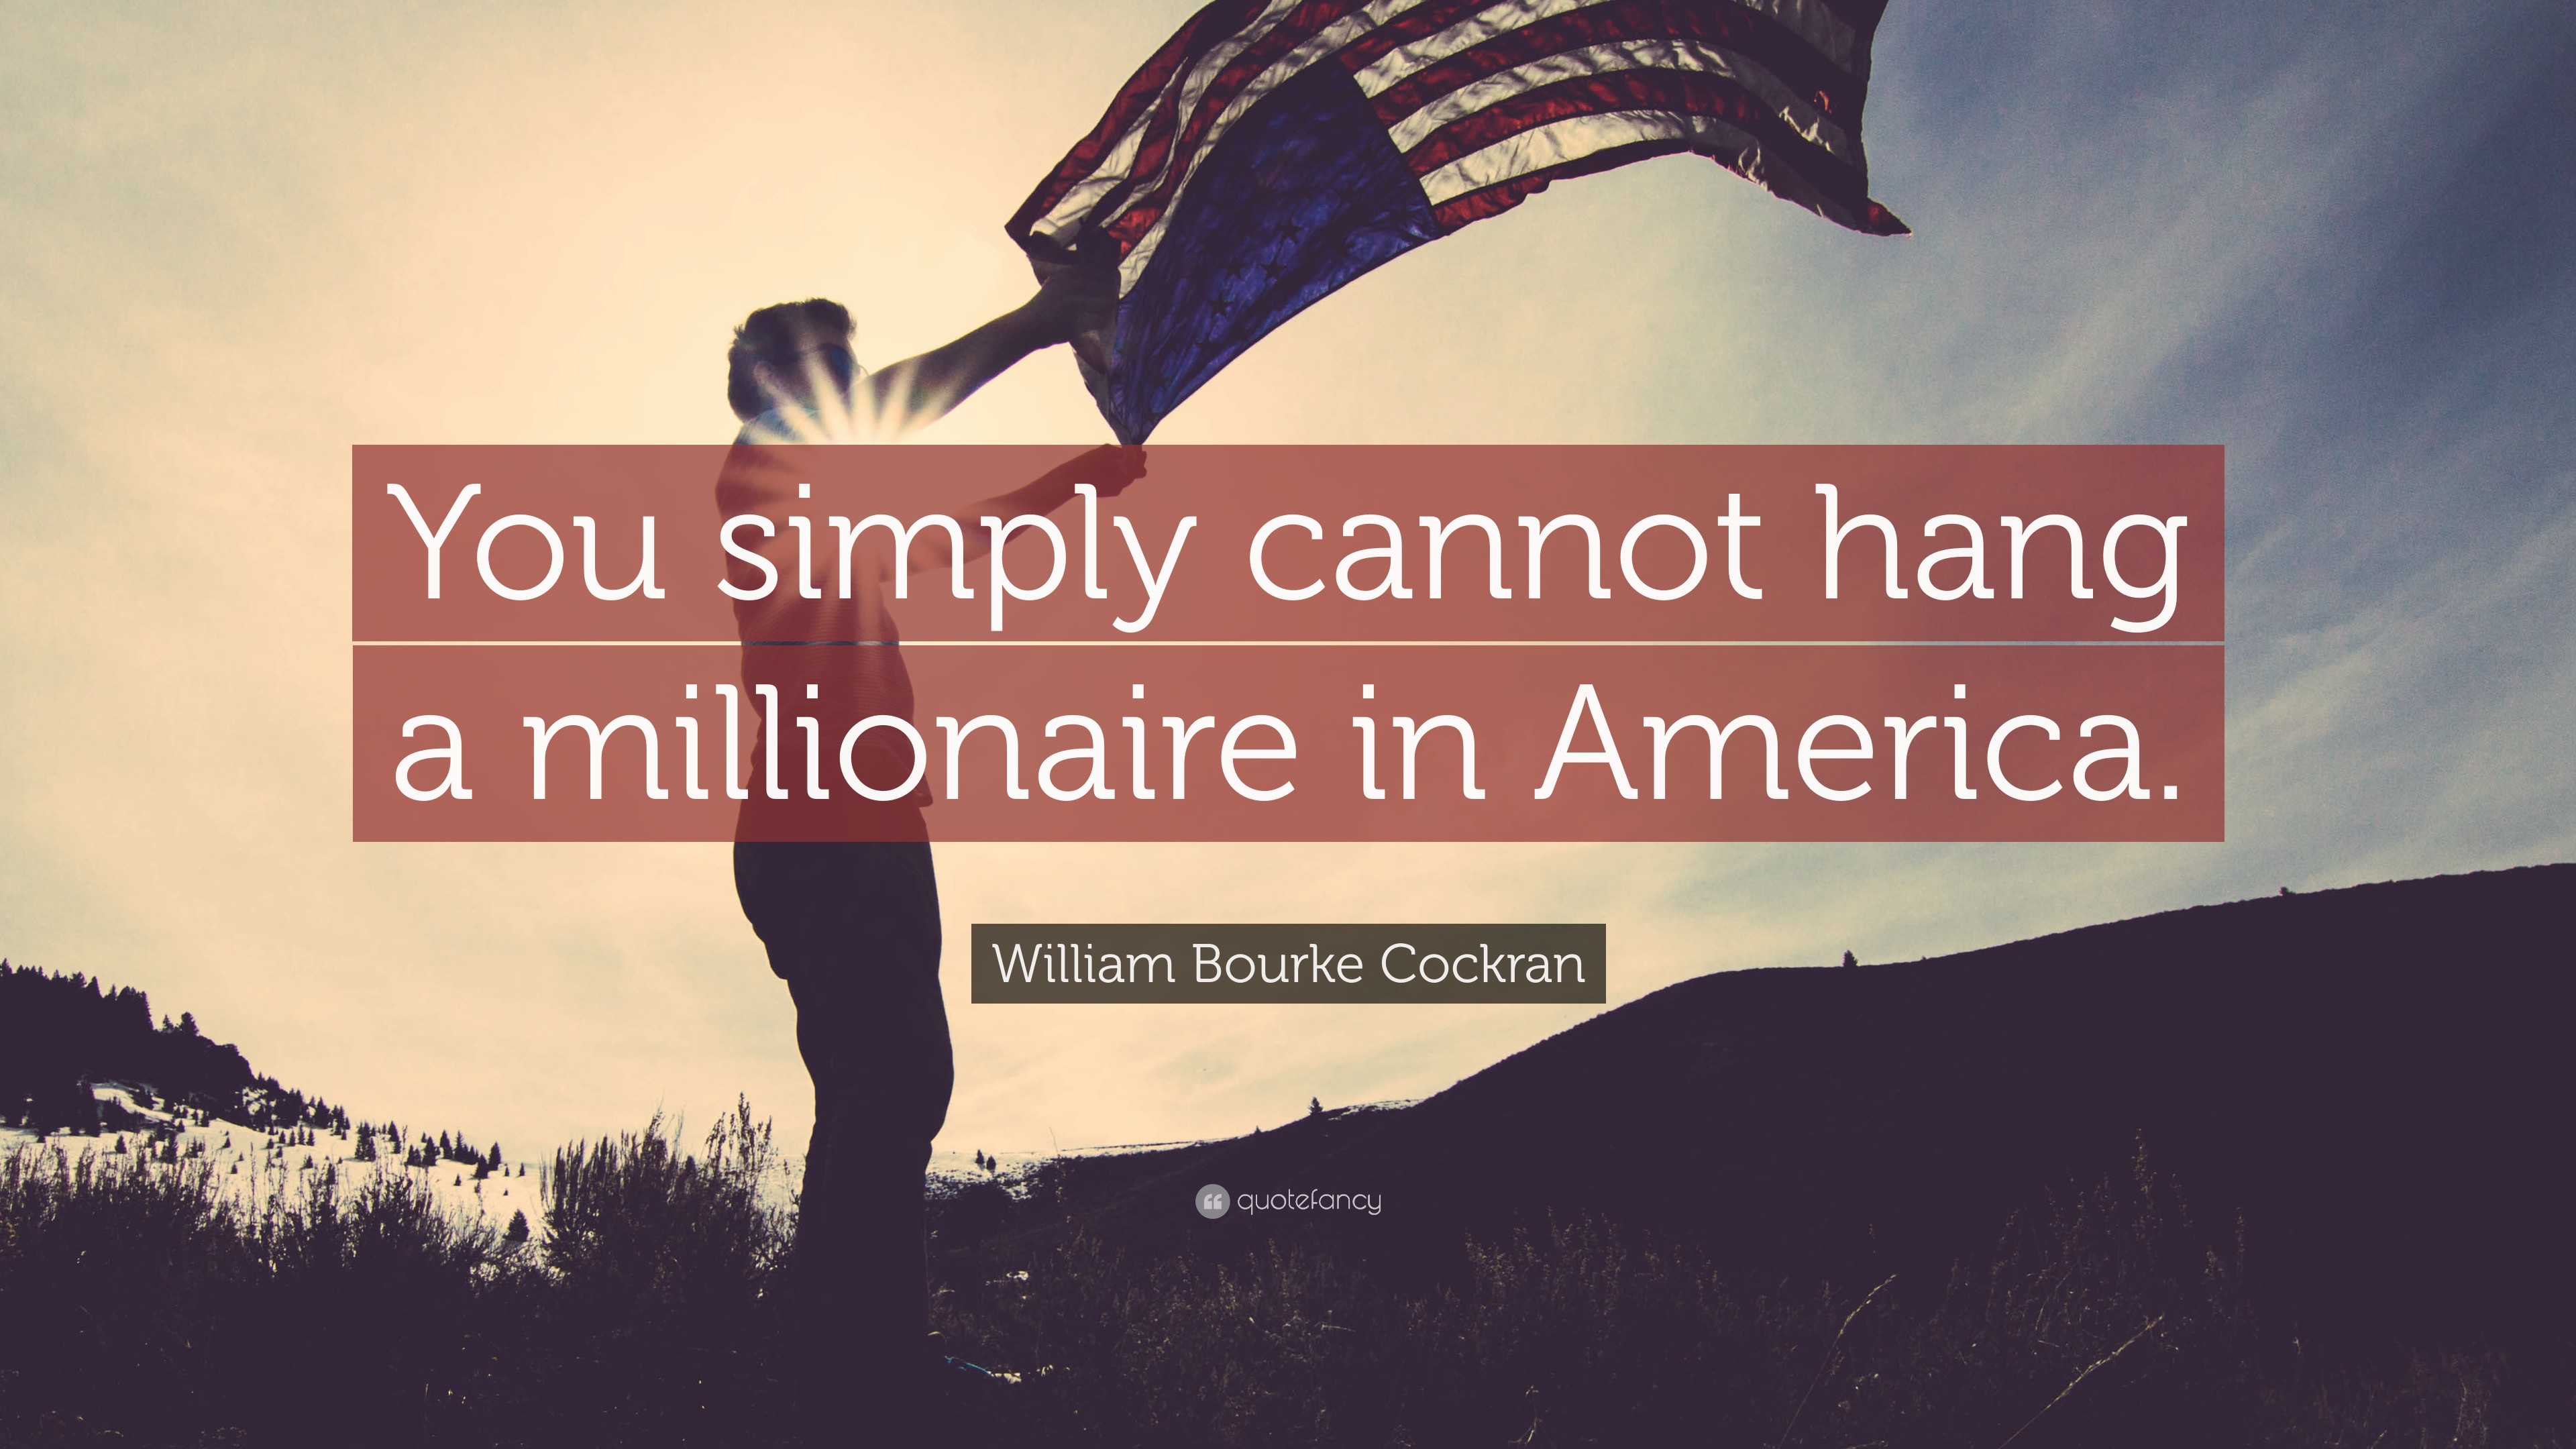 3840x2160 William Bourke Cockran Quote: “You simply cannot hang a millionaire in  America.”